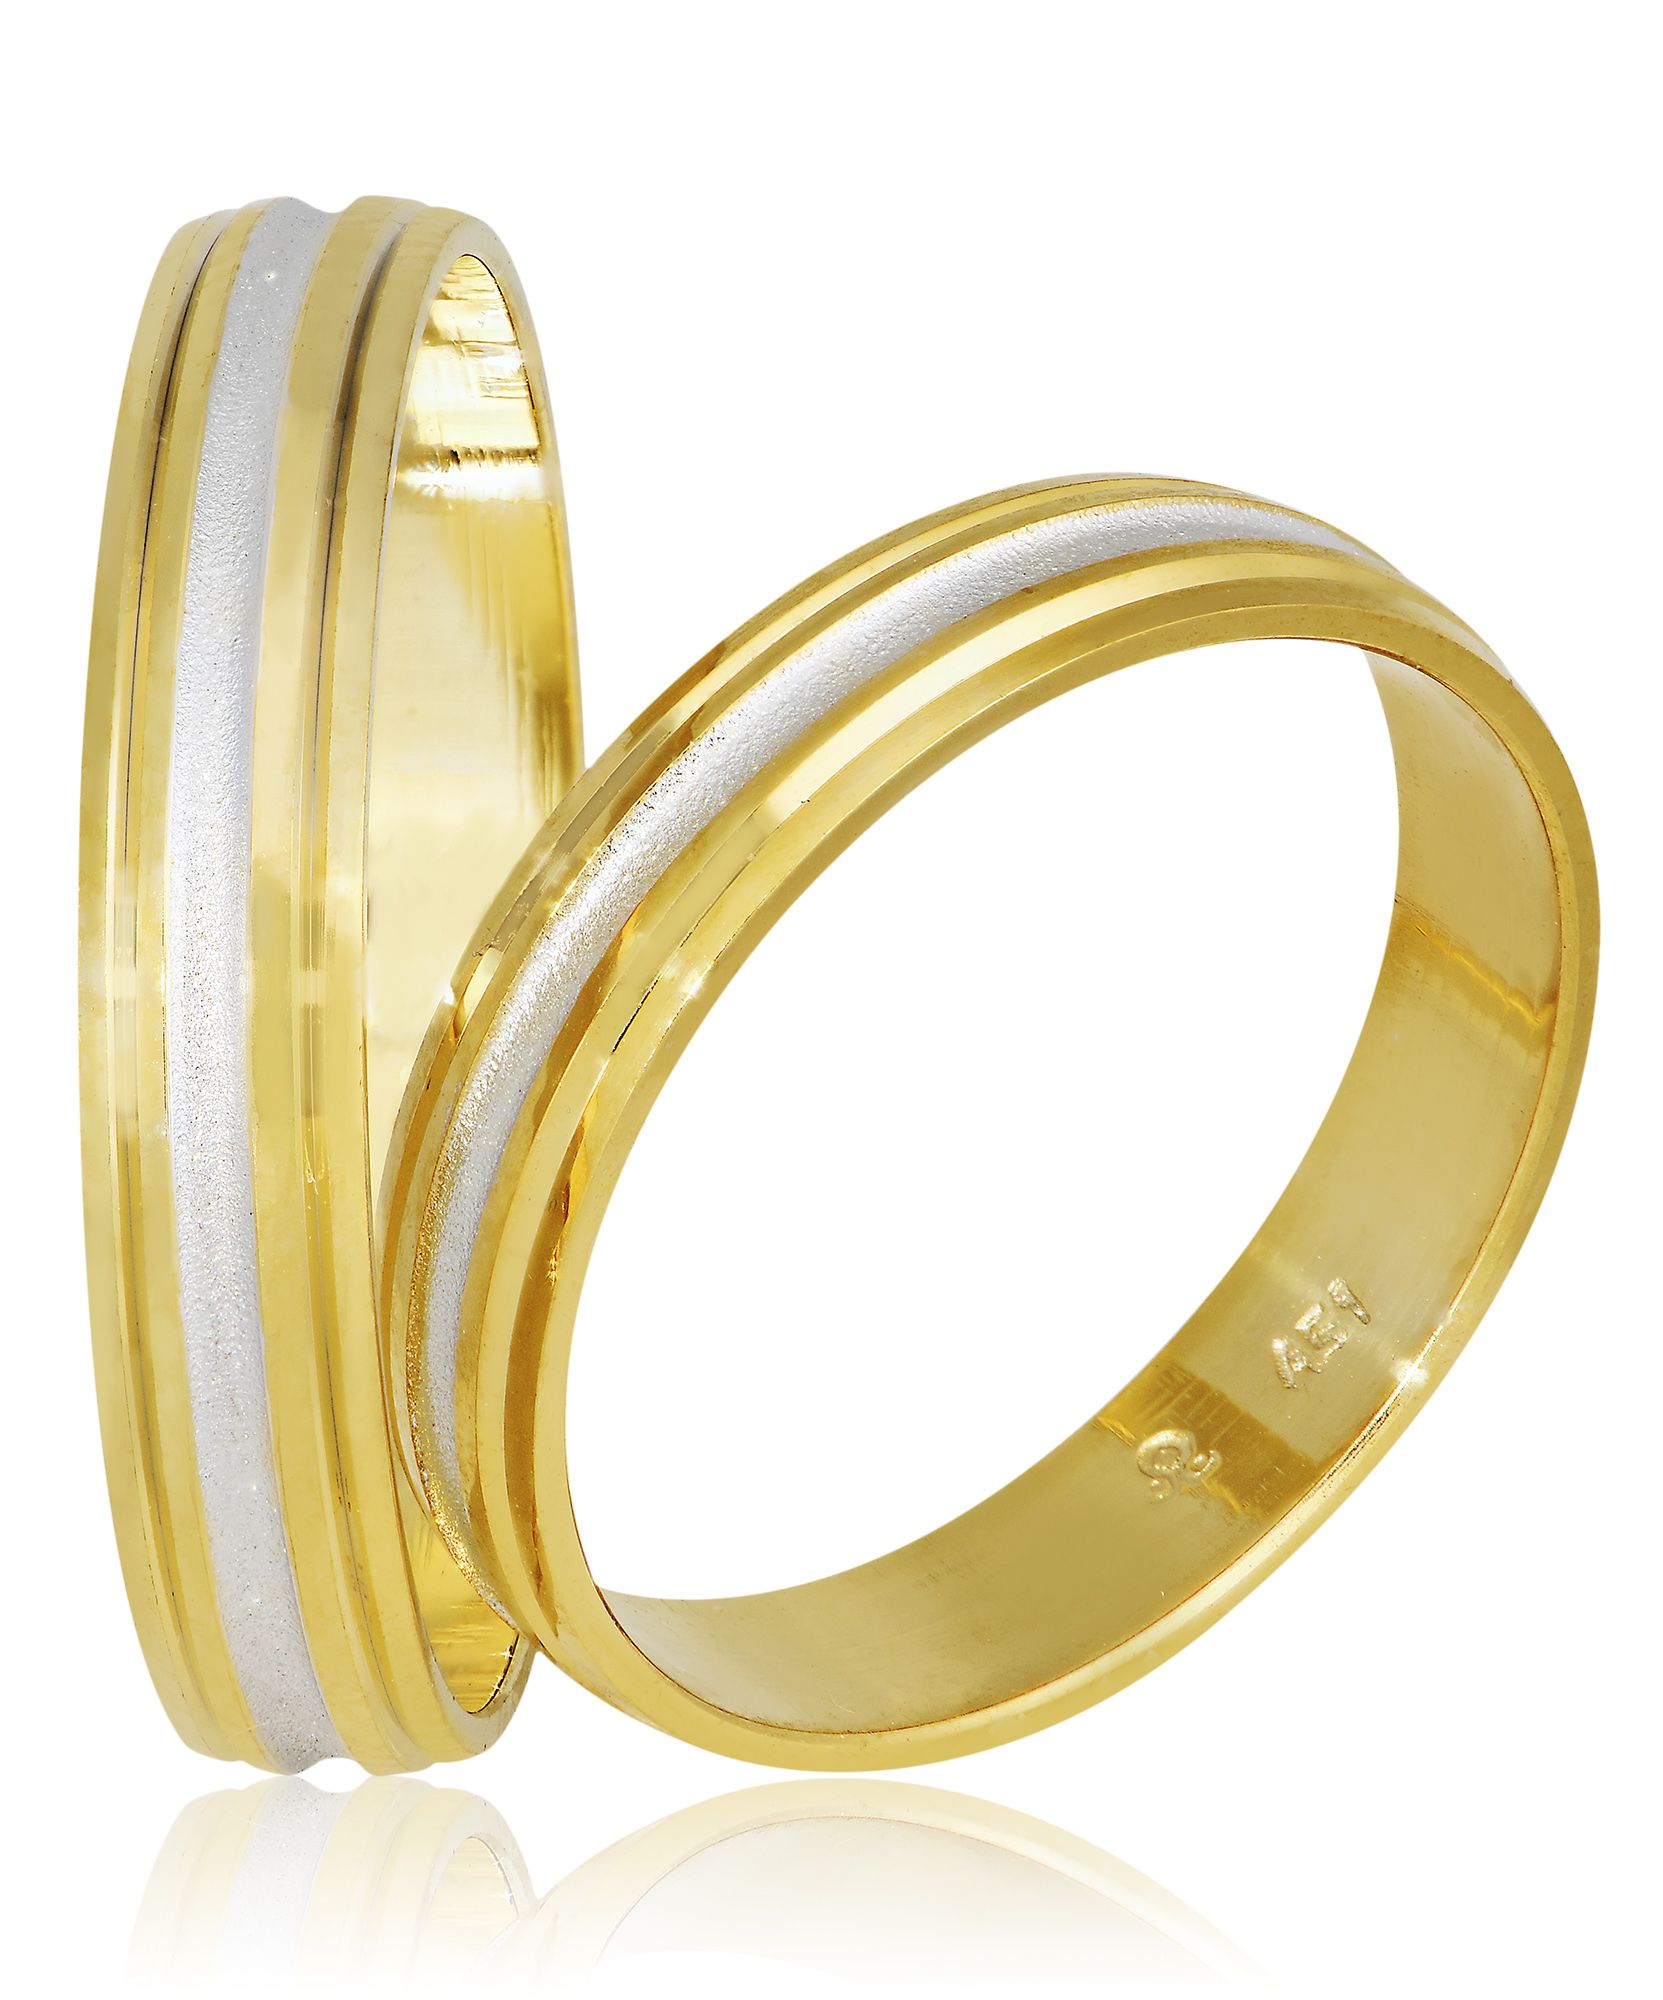 White gold & gold wedding rings 3mm (code Sxx2)